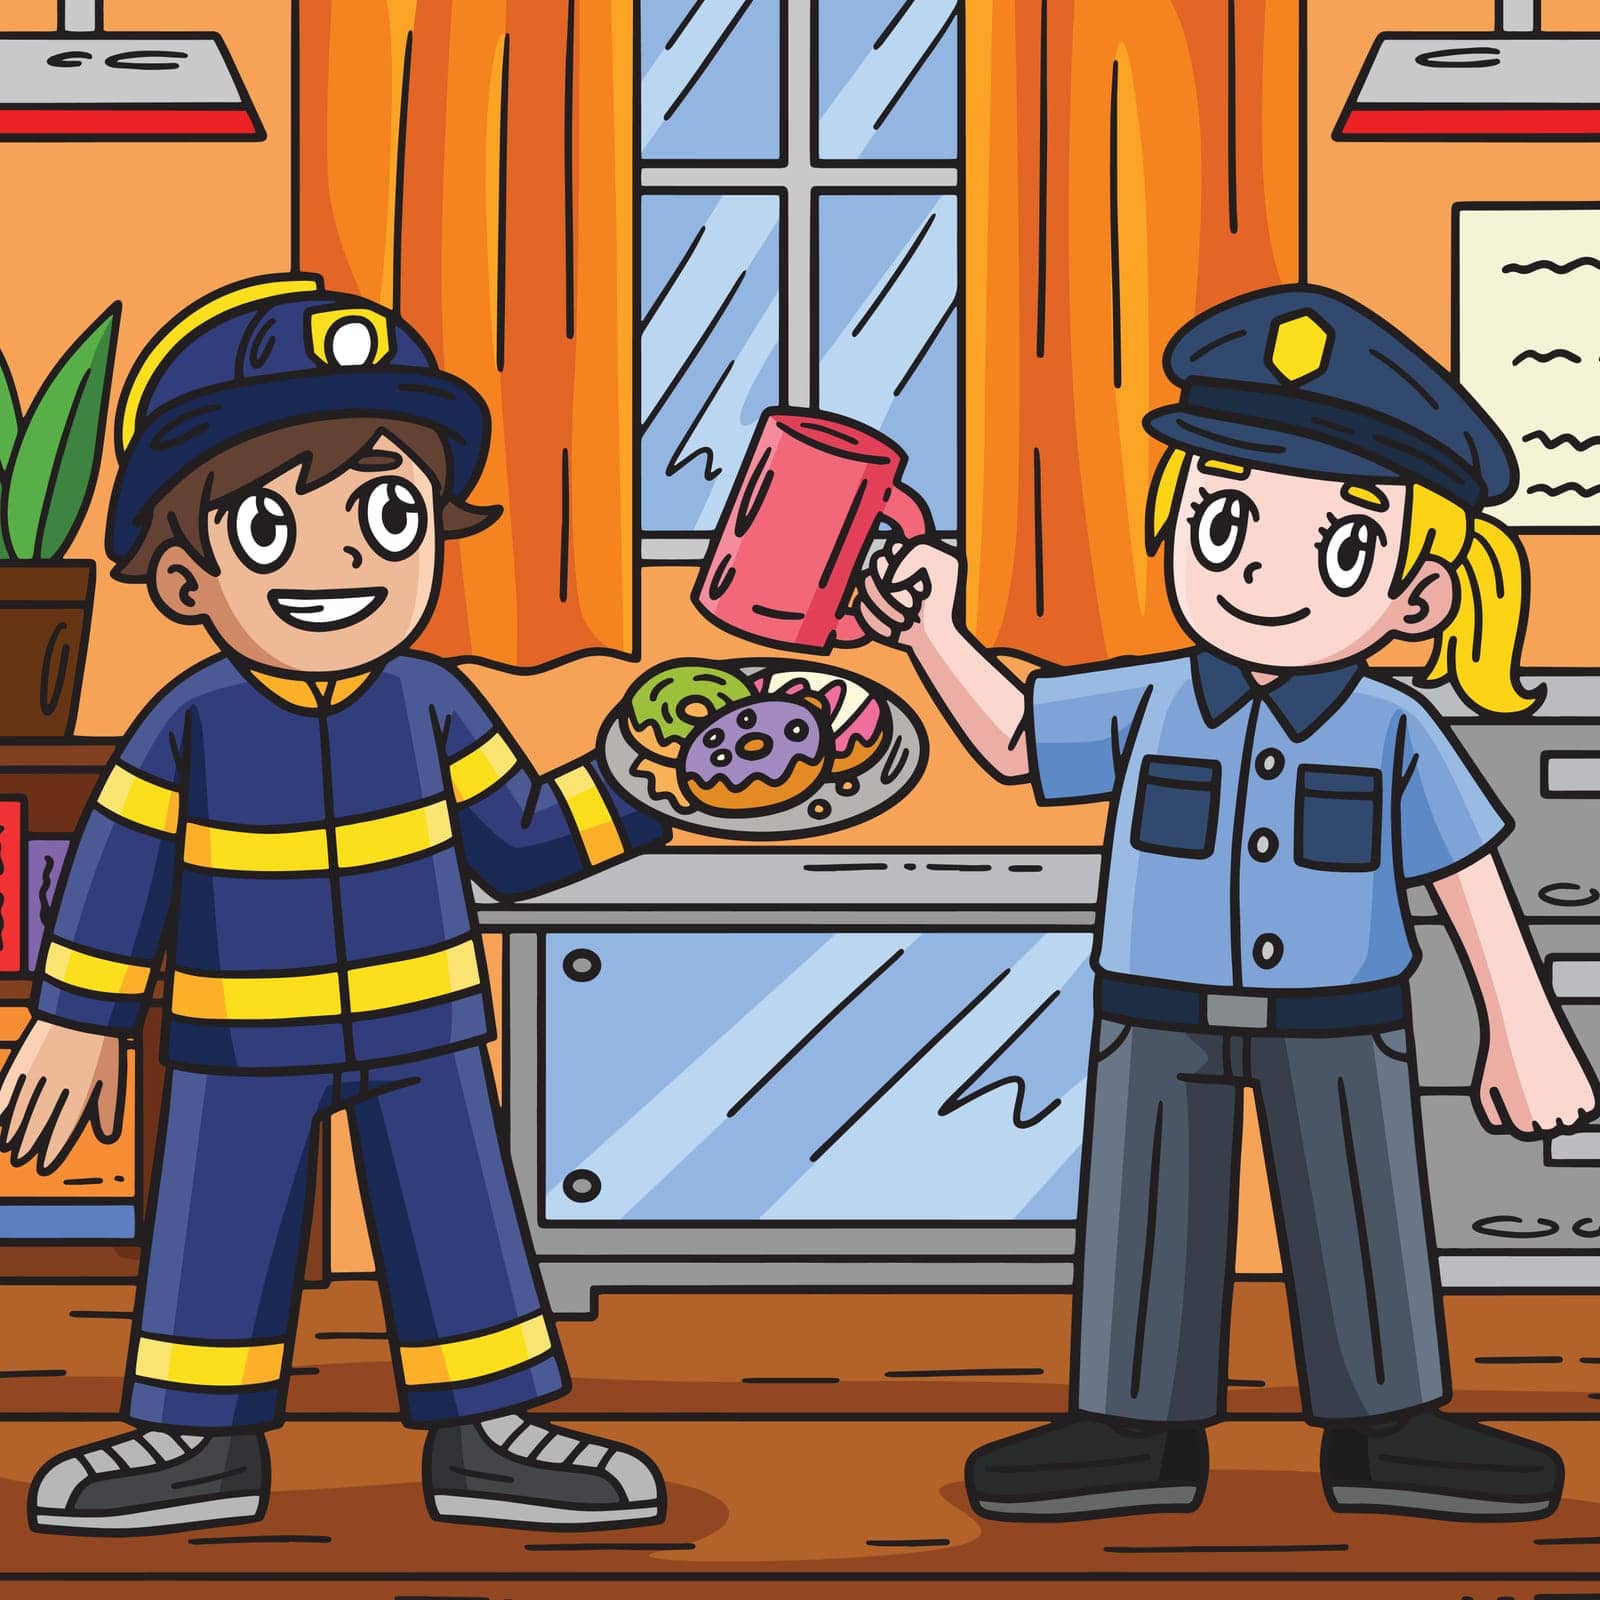 Firefighter and Policewoman Colored Cartoon by abbydesign